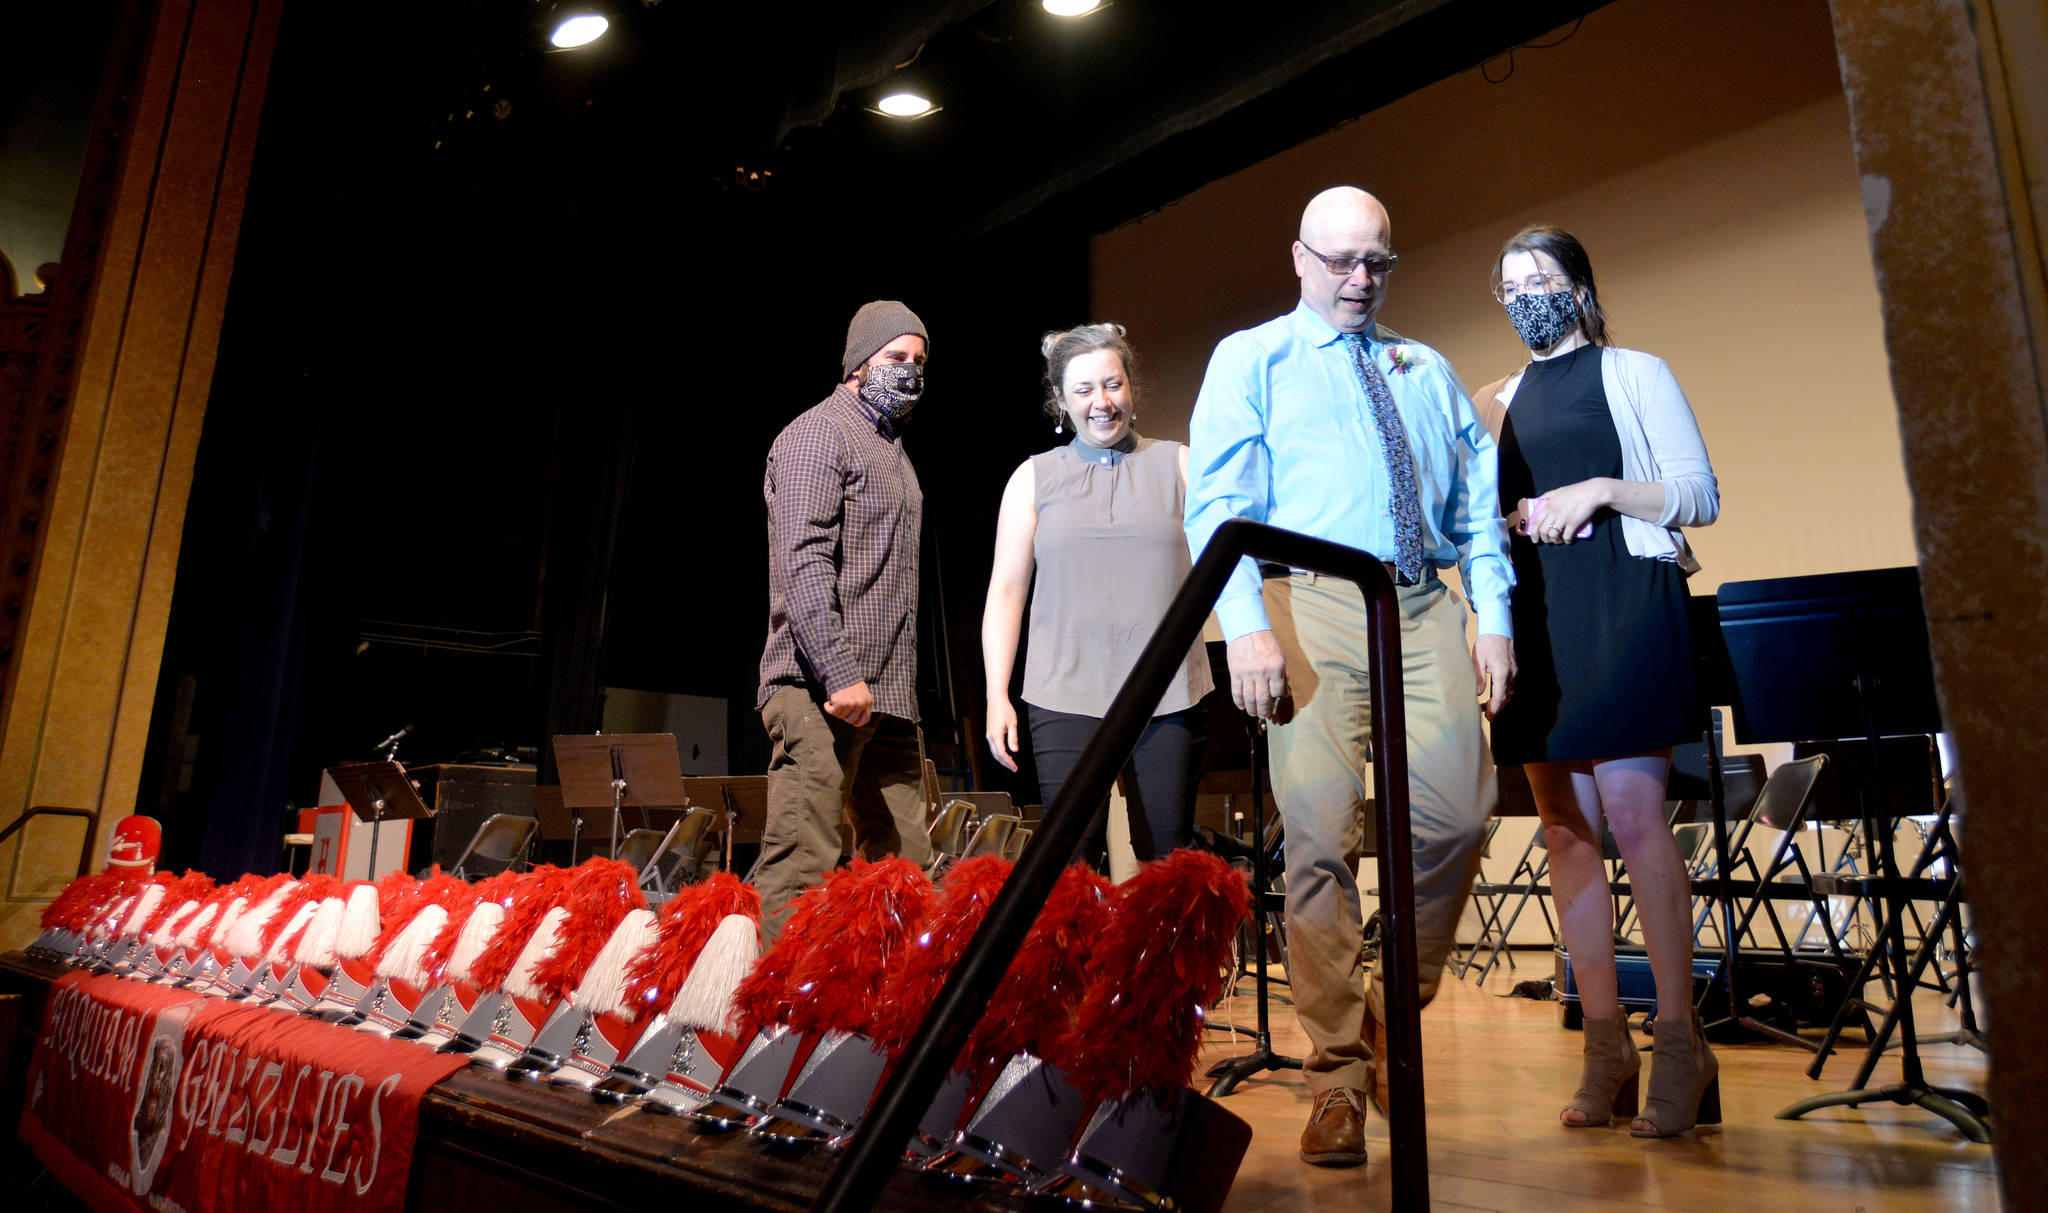 DAVE HAVILAND | THE DAILY WORLD
From left to right, Michael White, Emily White, Roger White and Carly Giles. White’s adult children escorted him off stage after an emotional entry and before many emotional presentations at the 7th Street Theatre in his honor Saturday.